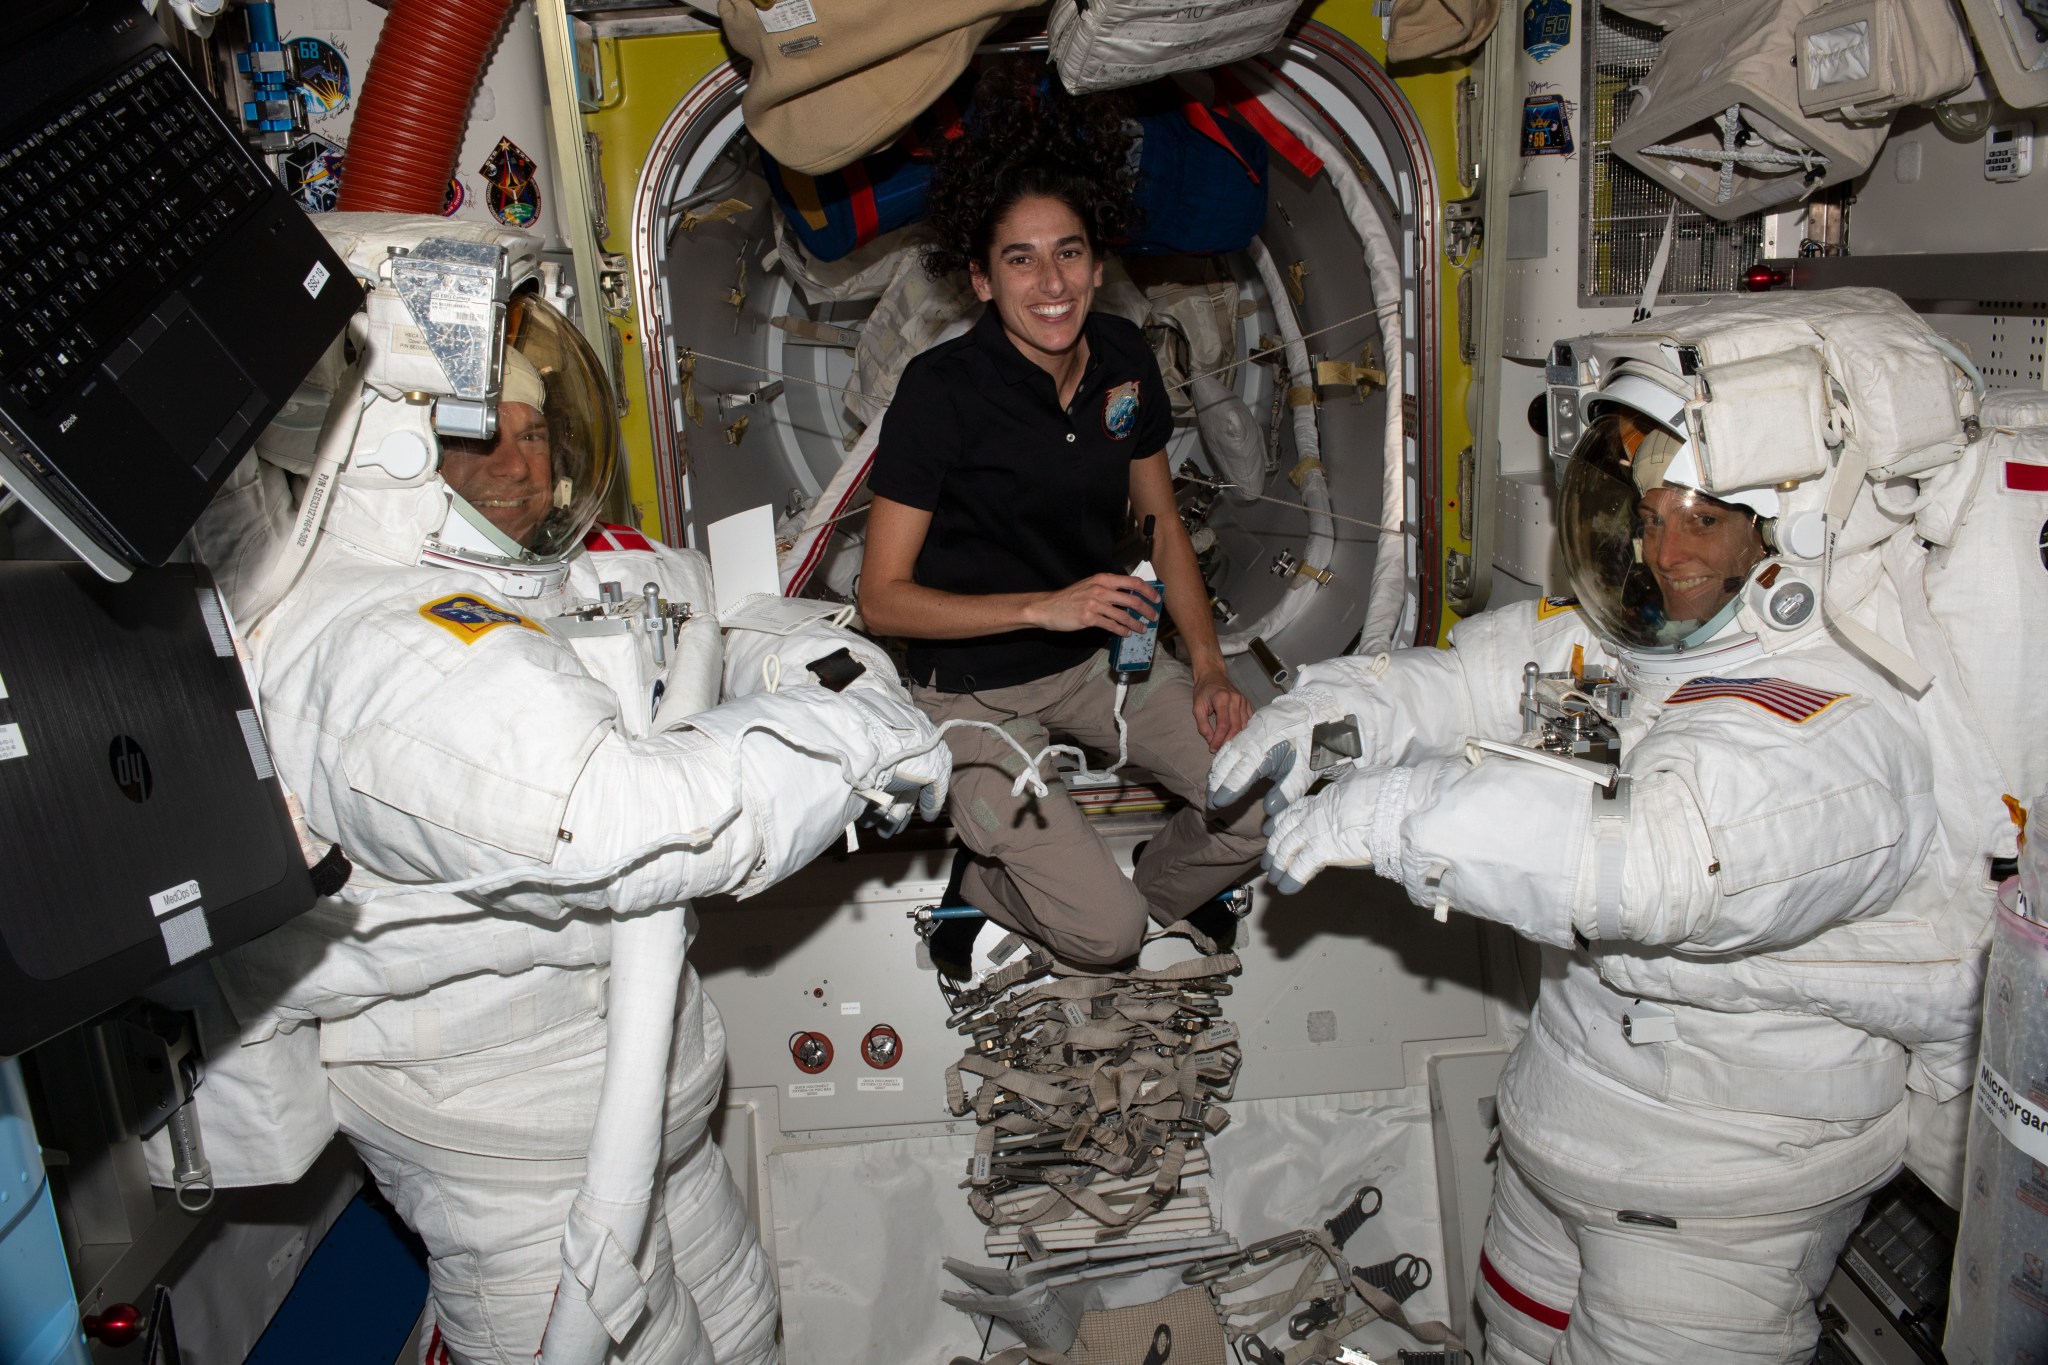 NASA astronaut Jasmin Moghbeli (center) assists astronauts Andreas Mogensen (left) from ESA (European Space Agency) and Loral O'Hara (right) from NASA as they try on their spacesuits and test the suits' components aboard the International Space Station's Quest airlock in preparation for an upcoming spacewalk.